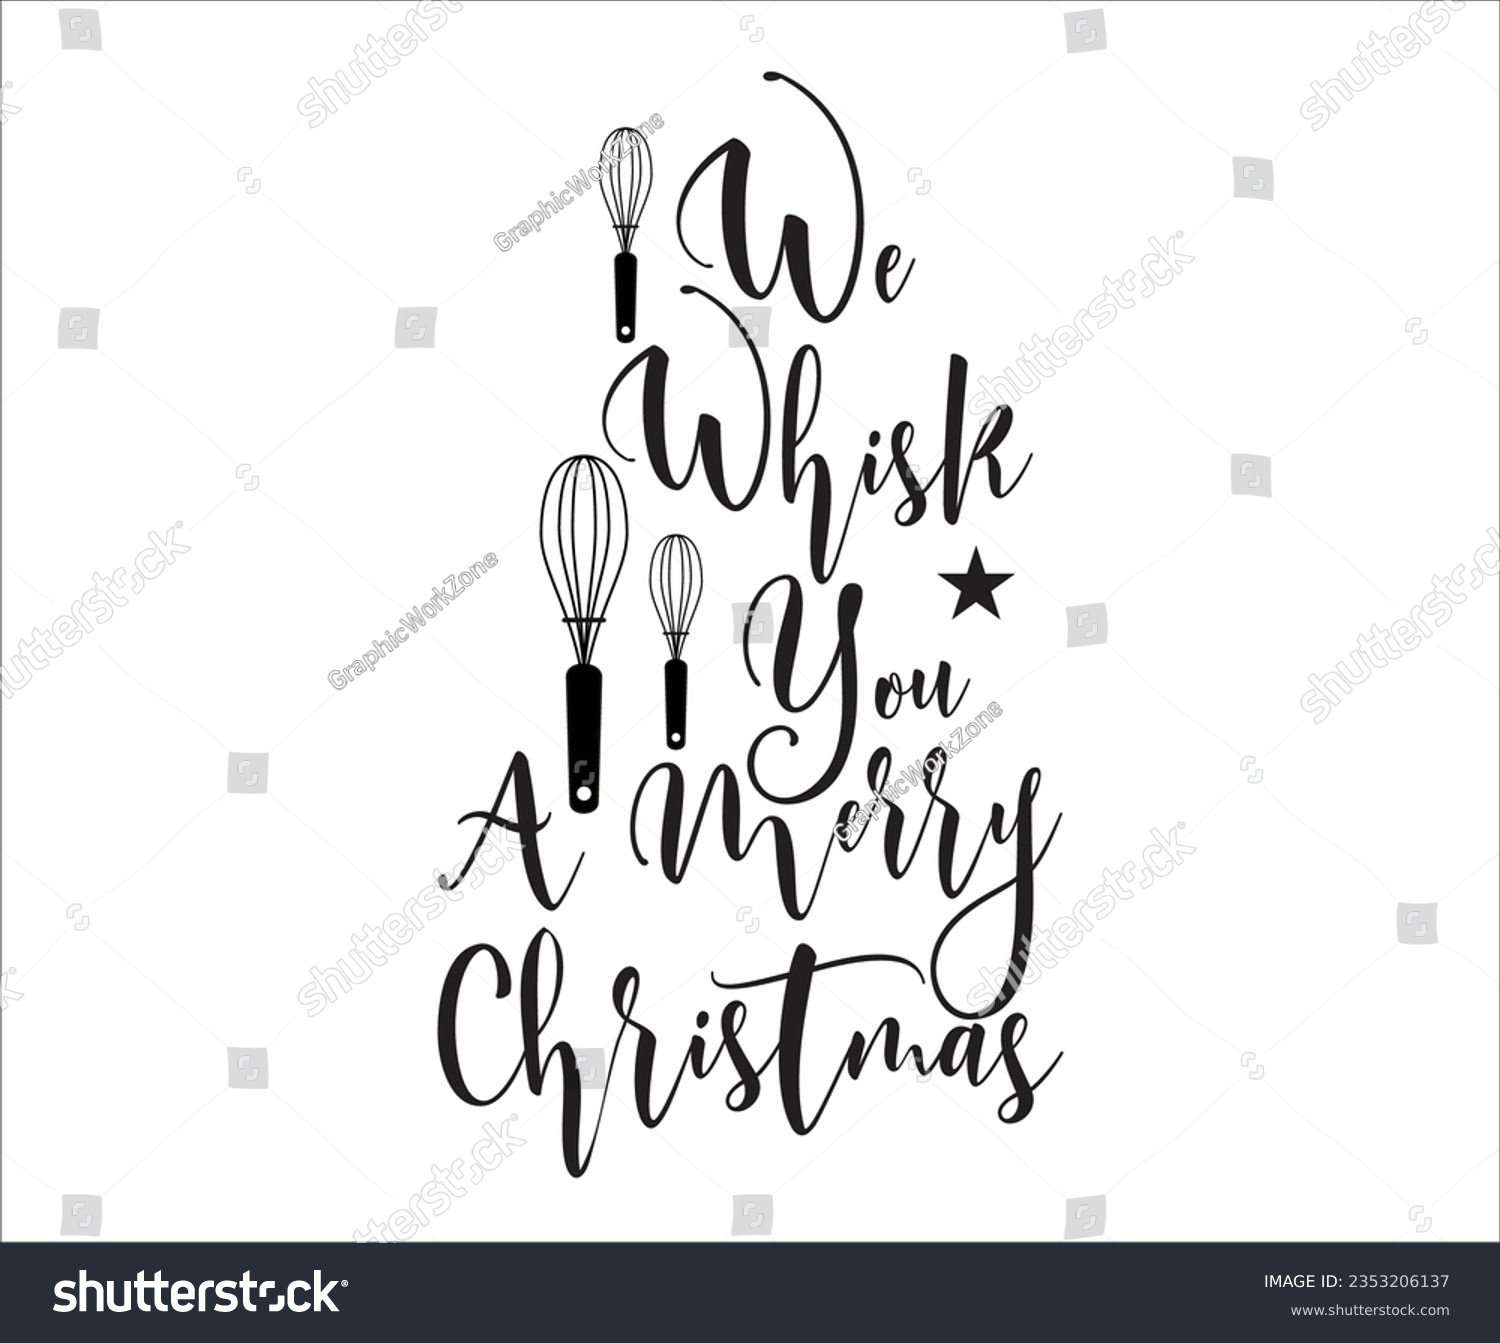 SVG of we wish you a merry christmas Svg, Christmas Svg, Christmas Saying svg, Holiday svg, winter Christmas, Ornament svg